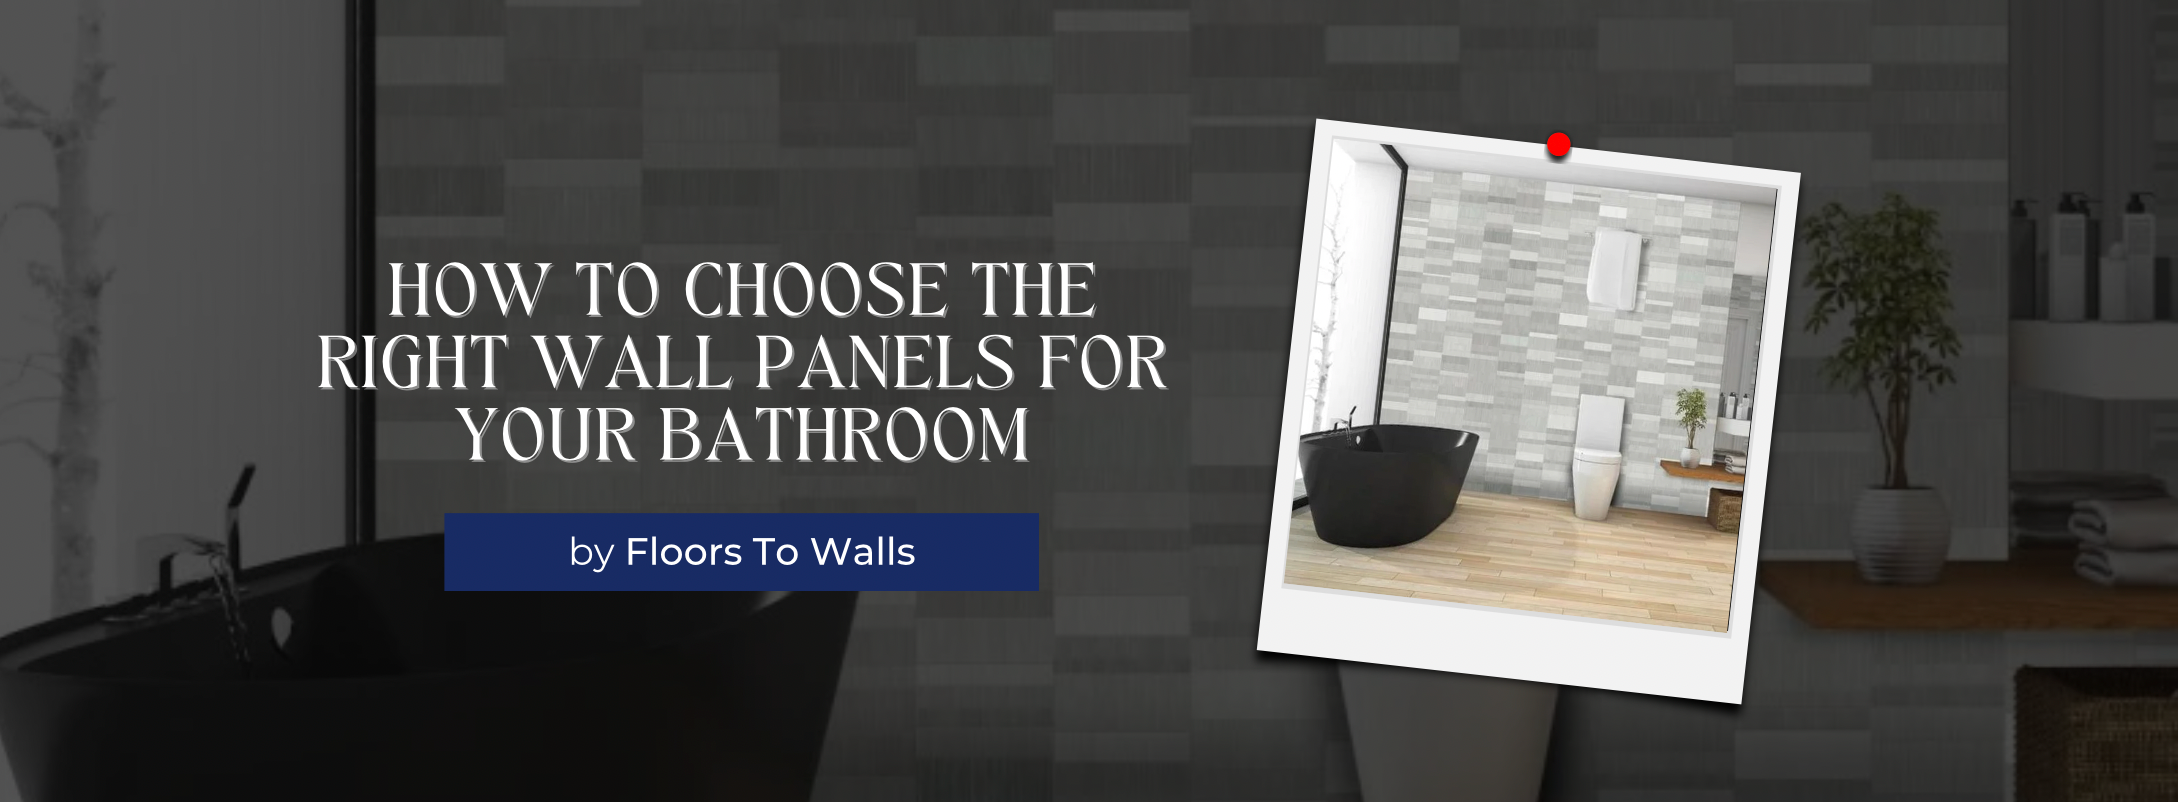 How to Choose the Right Wall Panels for Your Bathroom